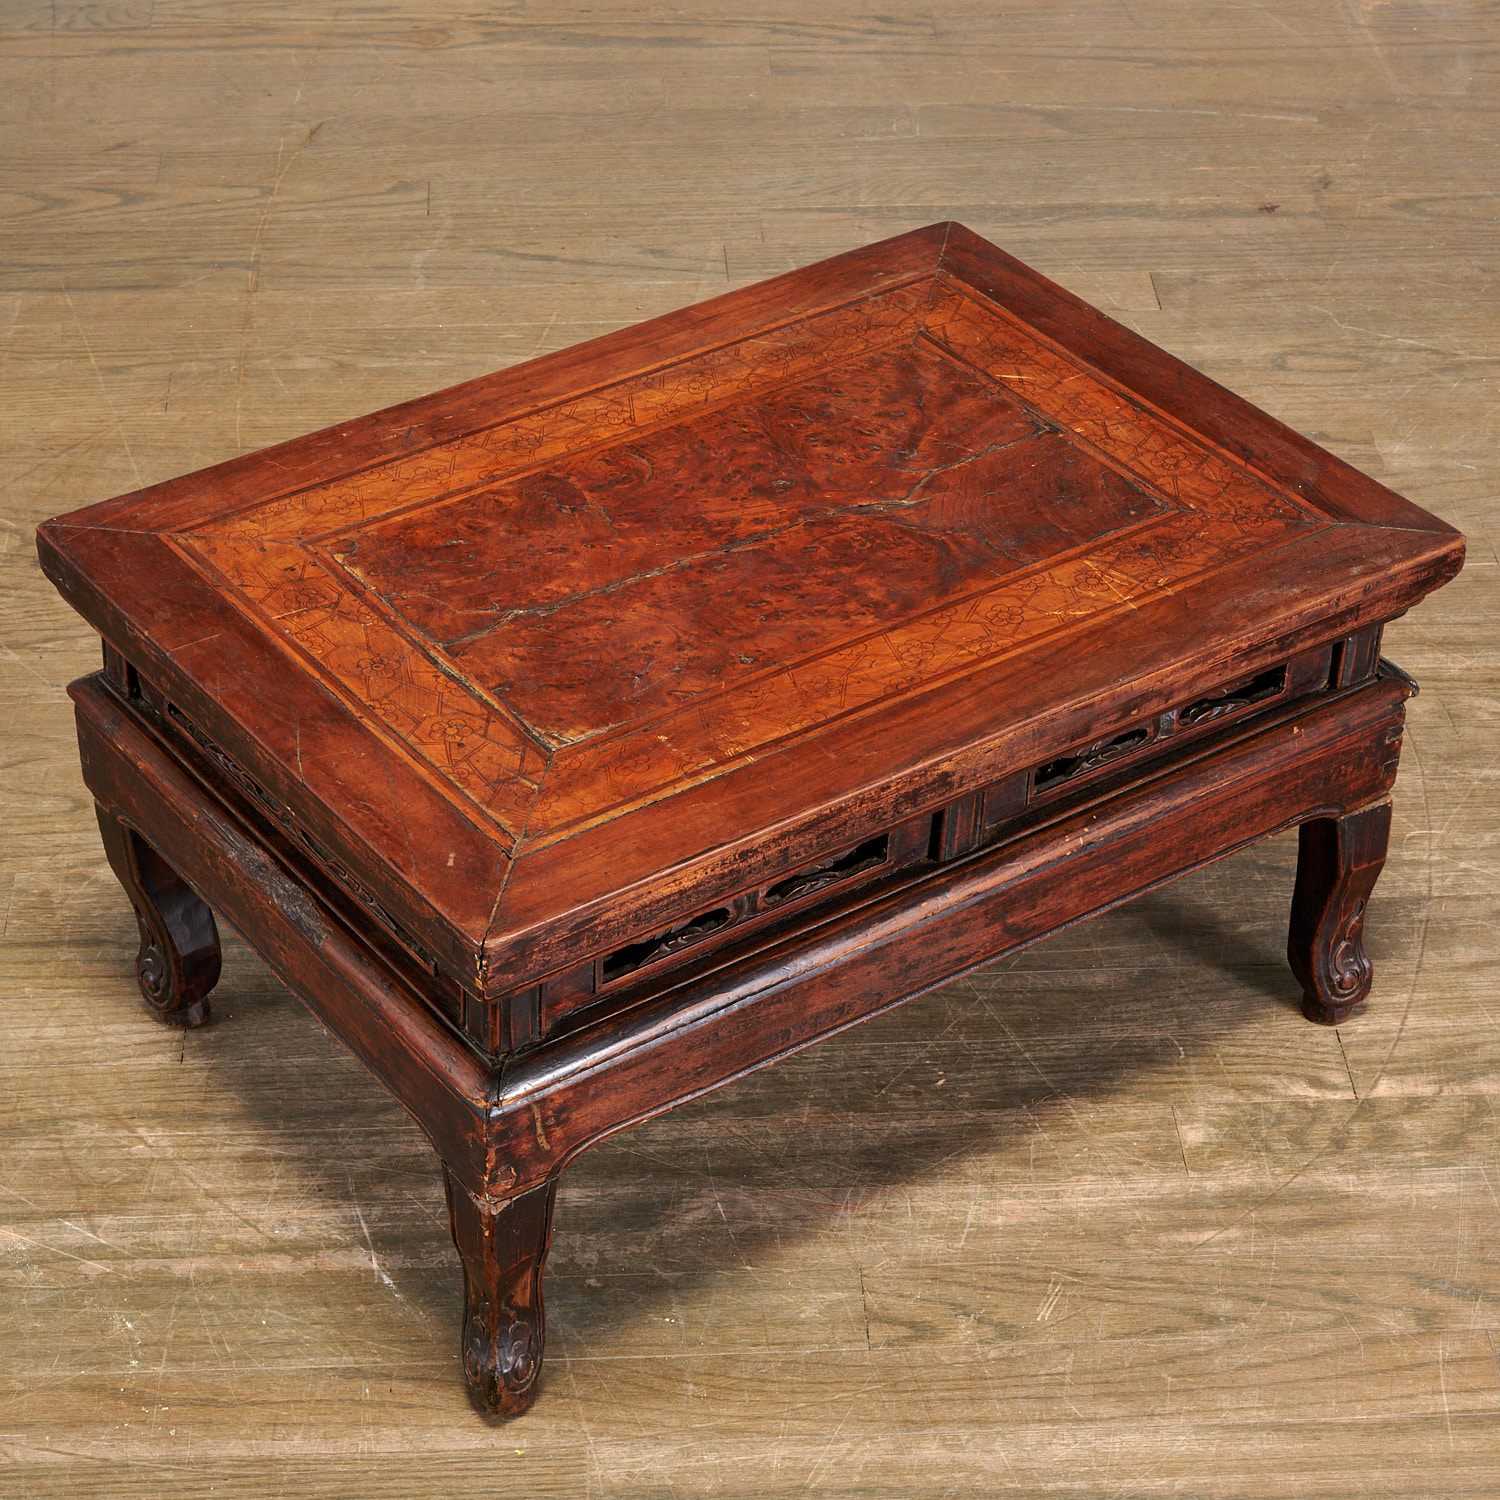 UNUSUAL CHINESE HARDWOOD TRAVELING 2ce7a5